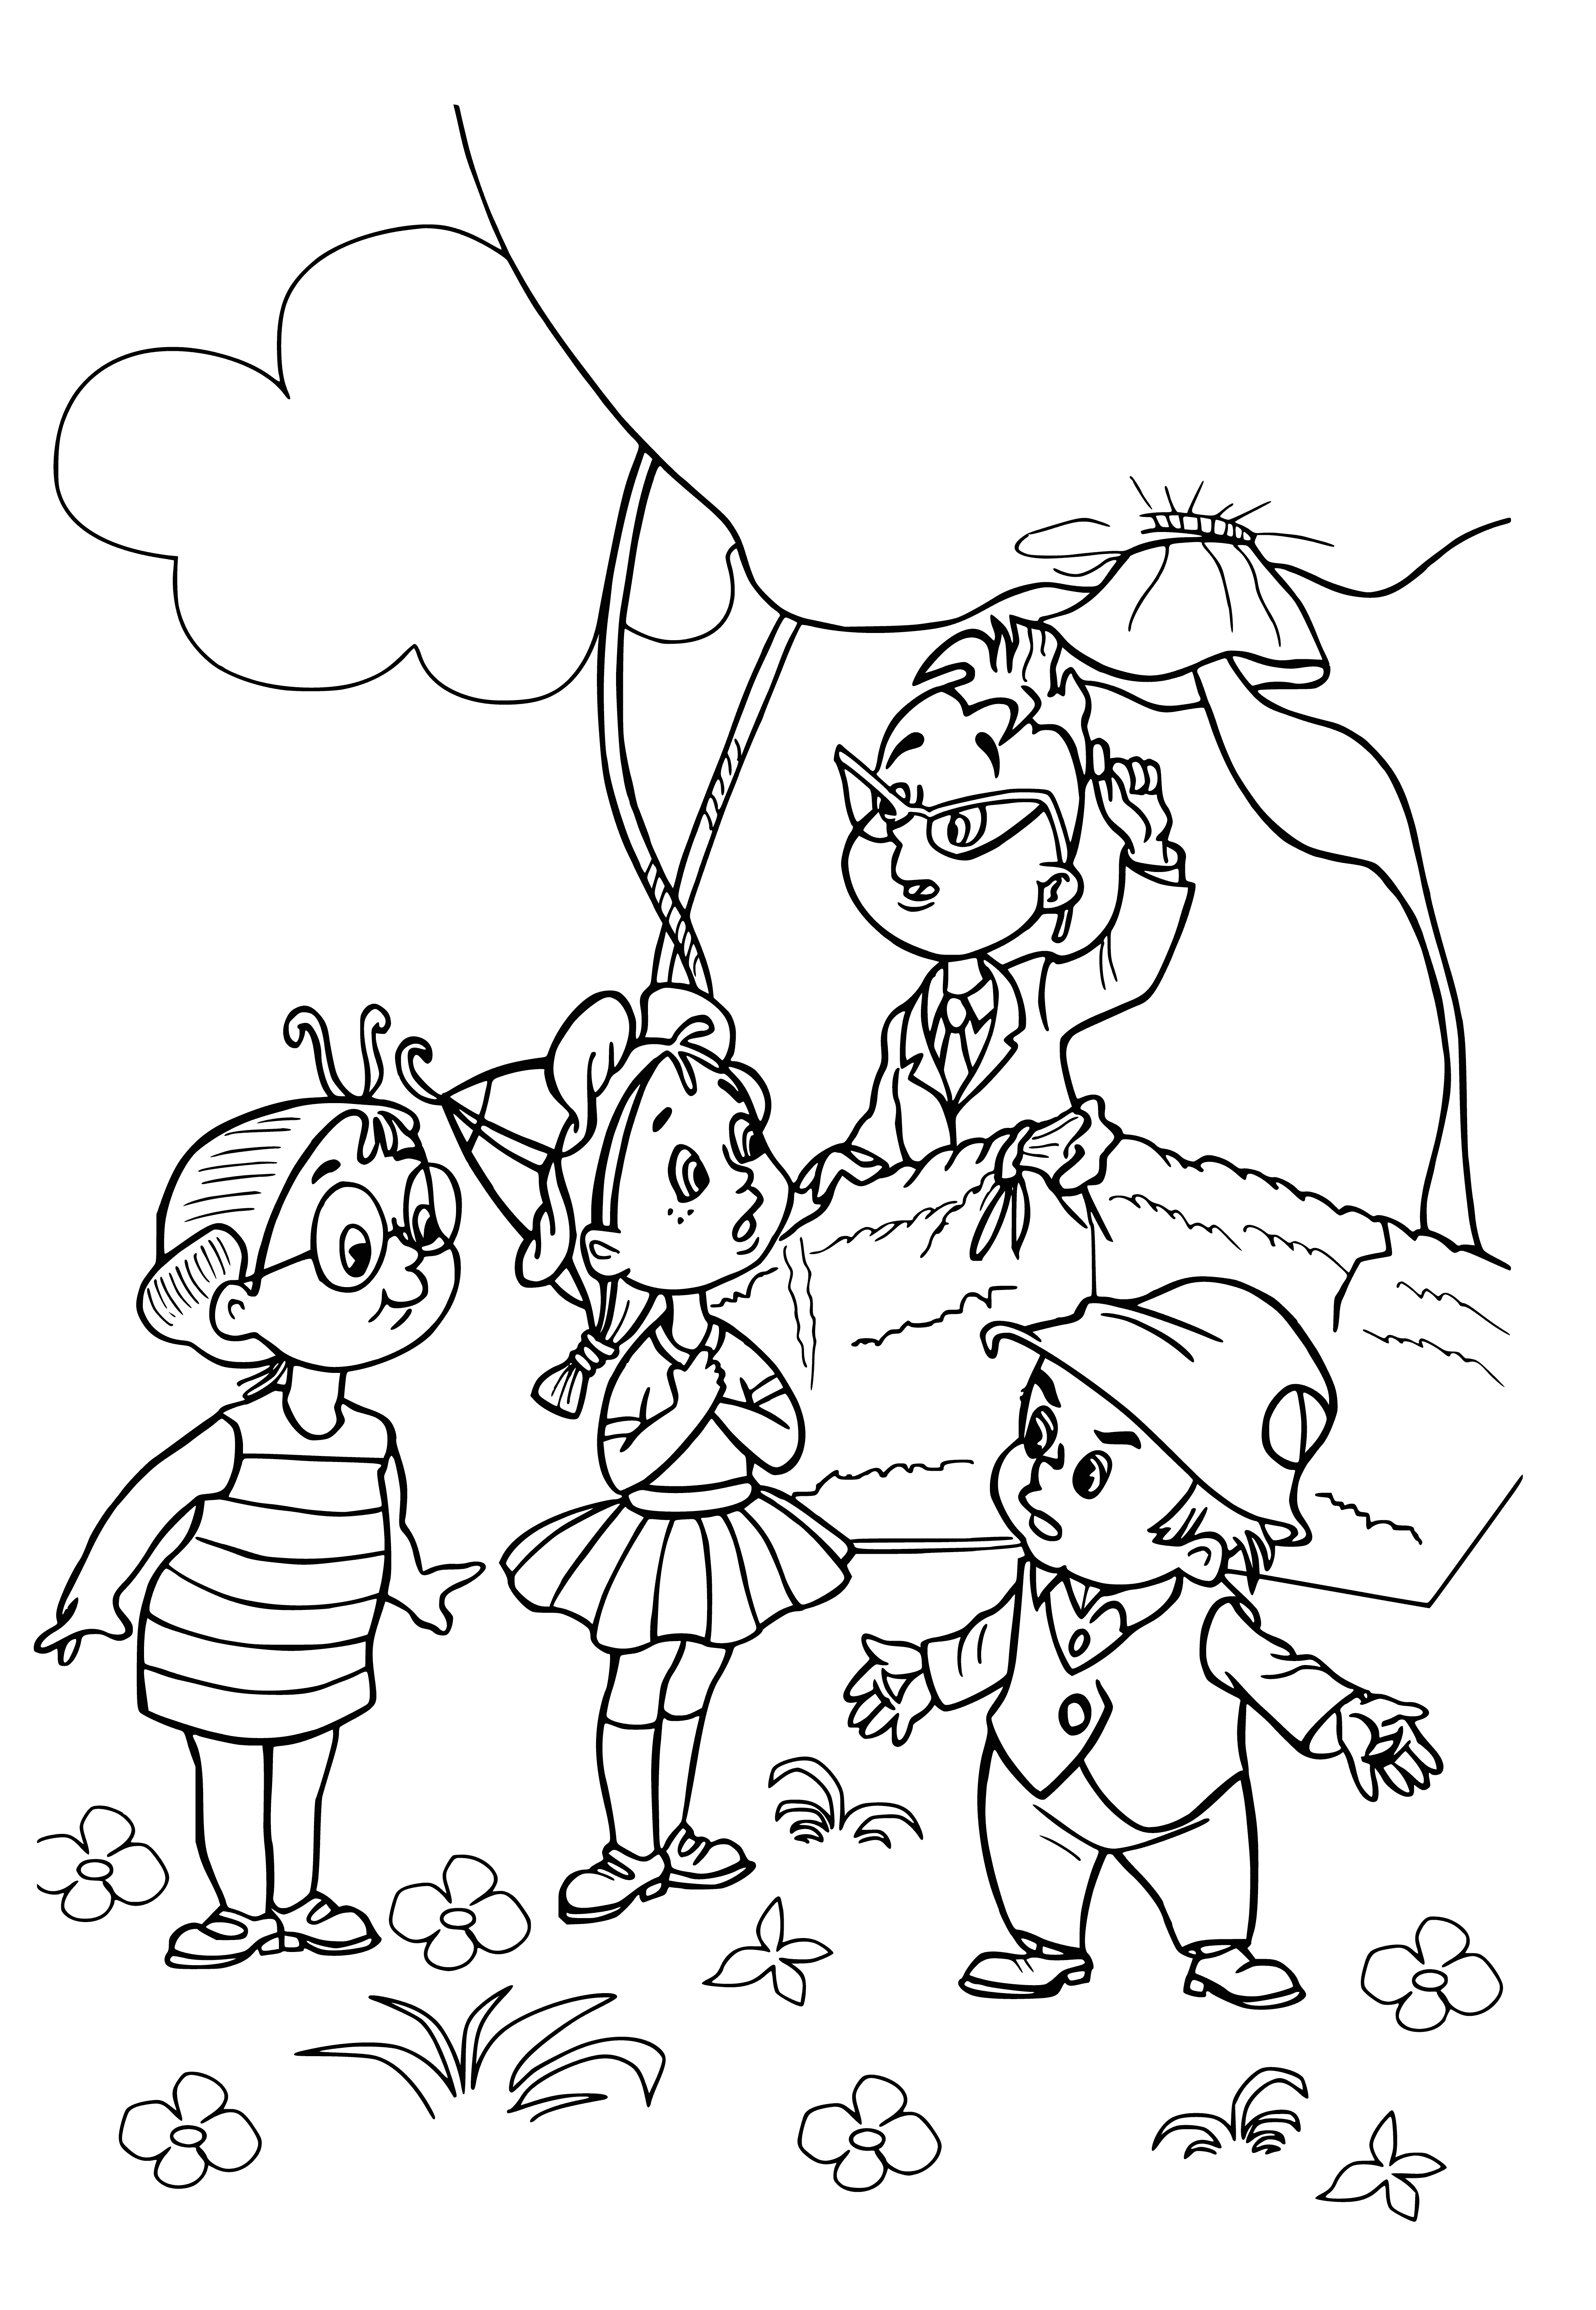 coloring page: Coloring page w/ hot air balloon saying "Dunno" floating in air & moon in background. #Coloring #Balloon #Moon